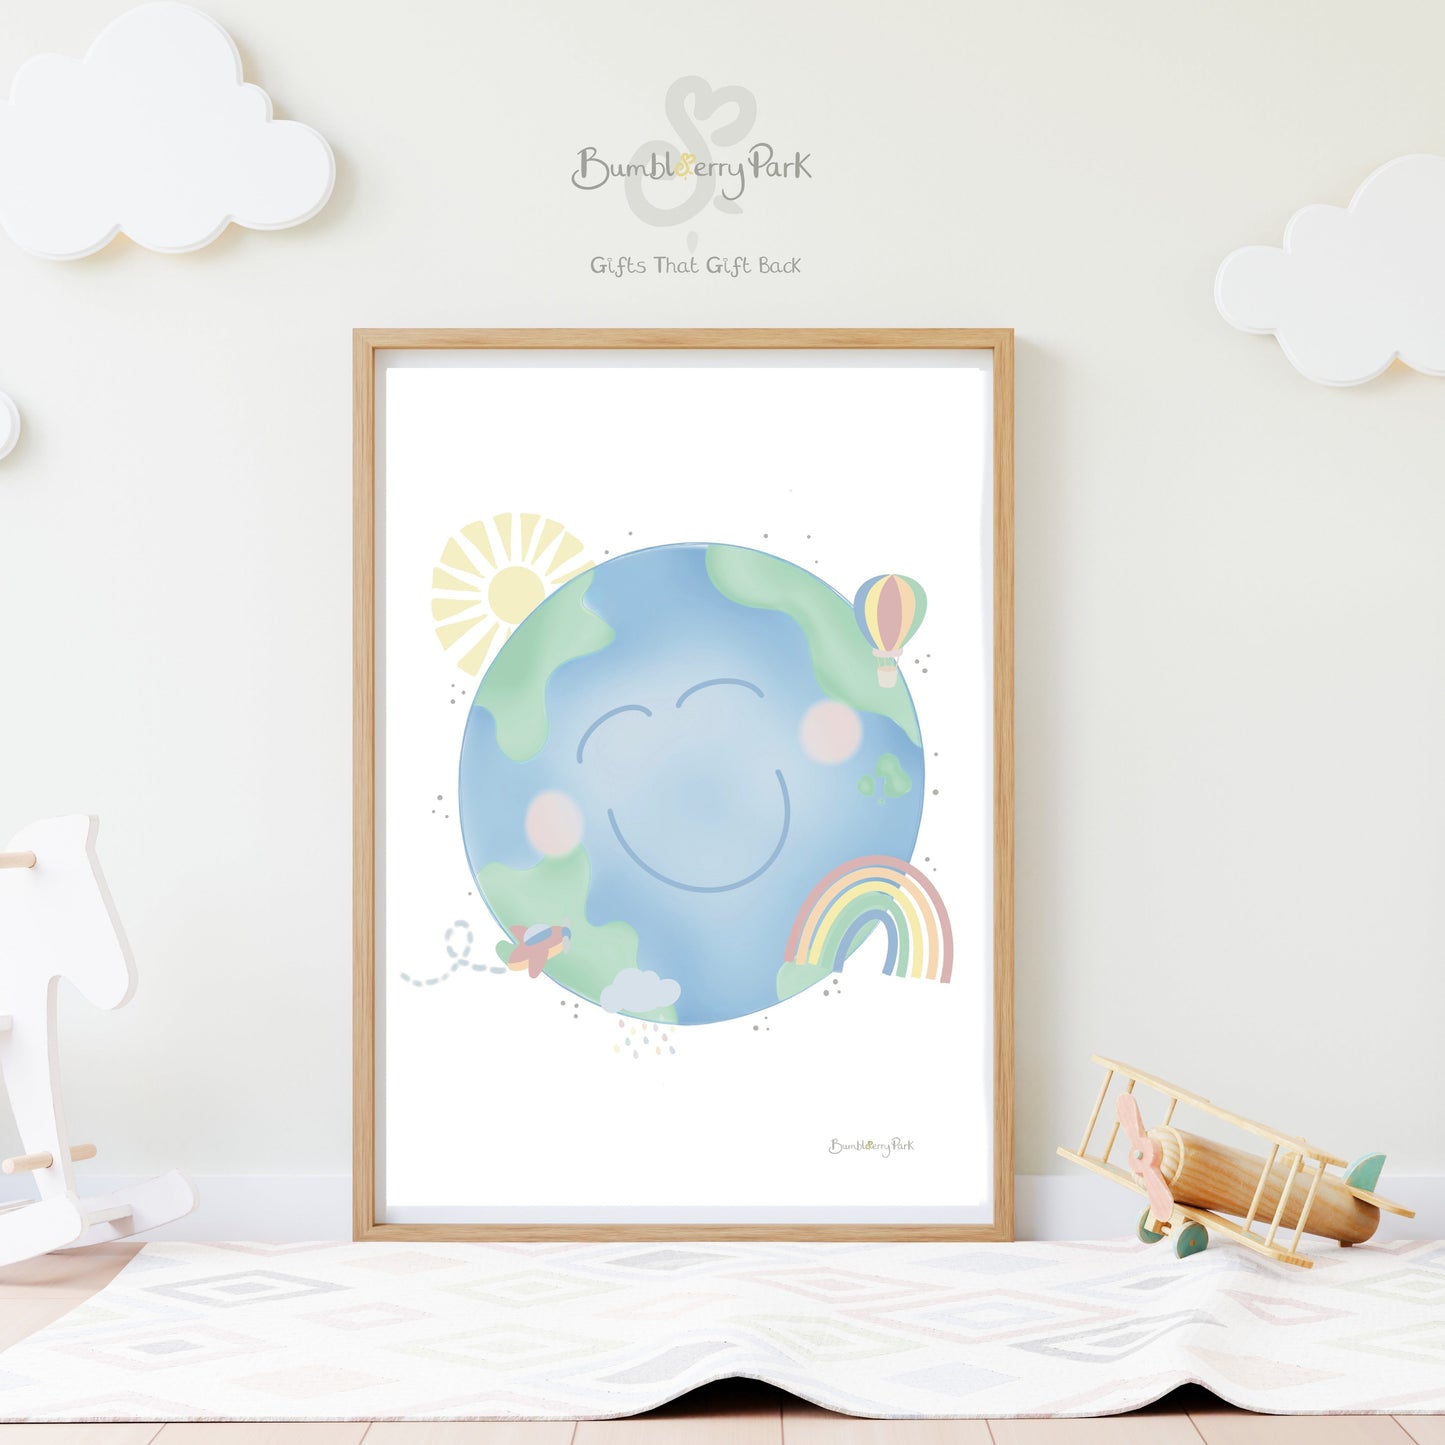 our earth pastel nursery print with rainbows aeroplane and sunshine illustrations framed on a nursery wall